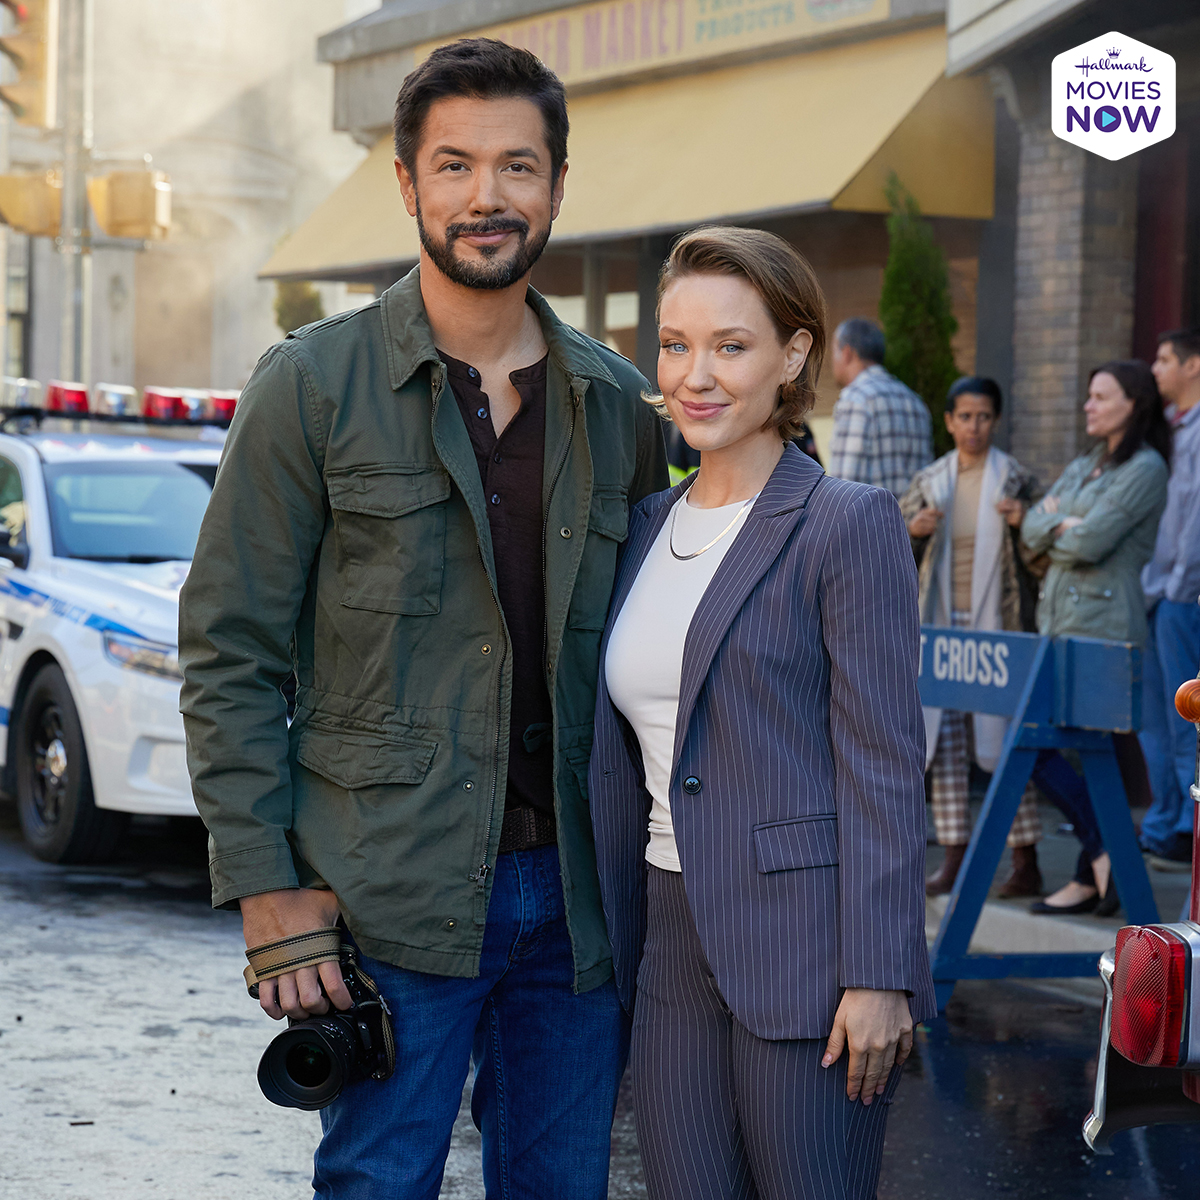 Every one of Betty's #LaciJMailey romances has ended in disaster, but will Alex @marcograzzini help her break a childhood curse & find her happily ever after? Find out in BettysBackLuckinLove now streaming on #HallmarkMoviesNow! #Chessies